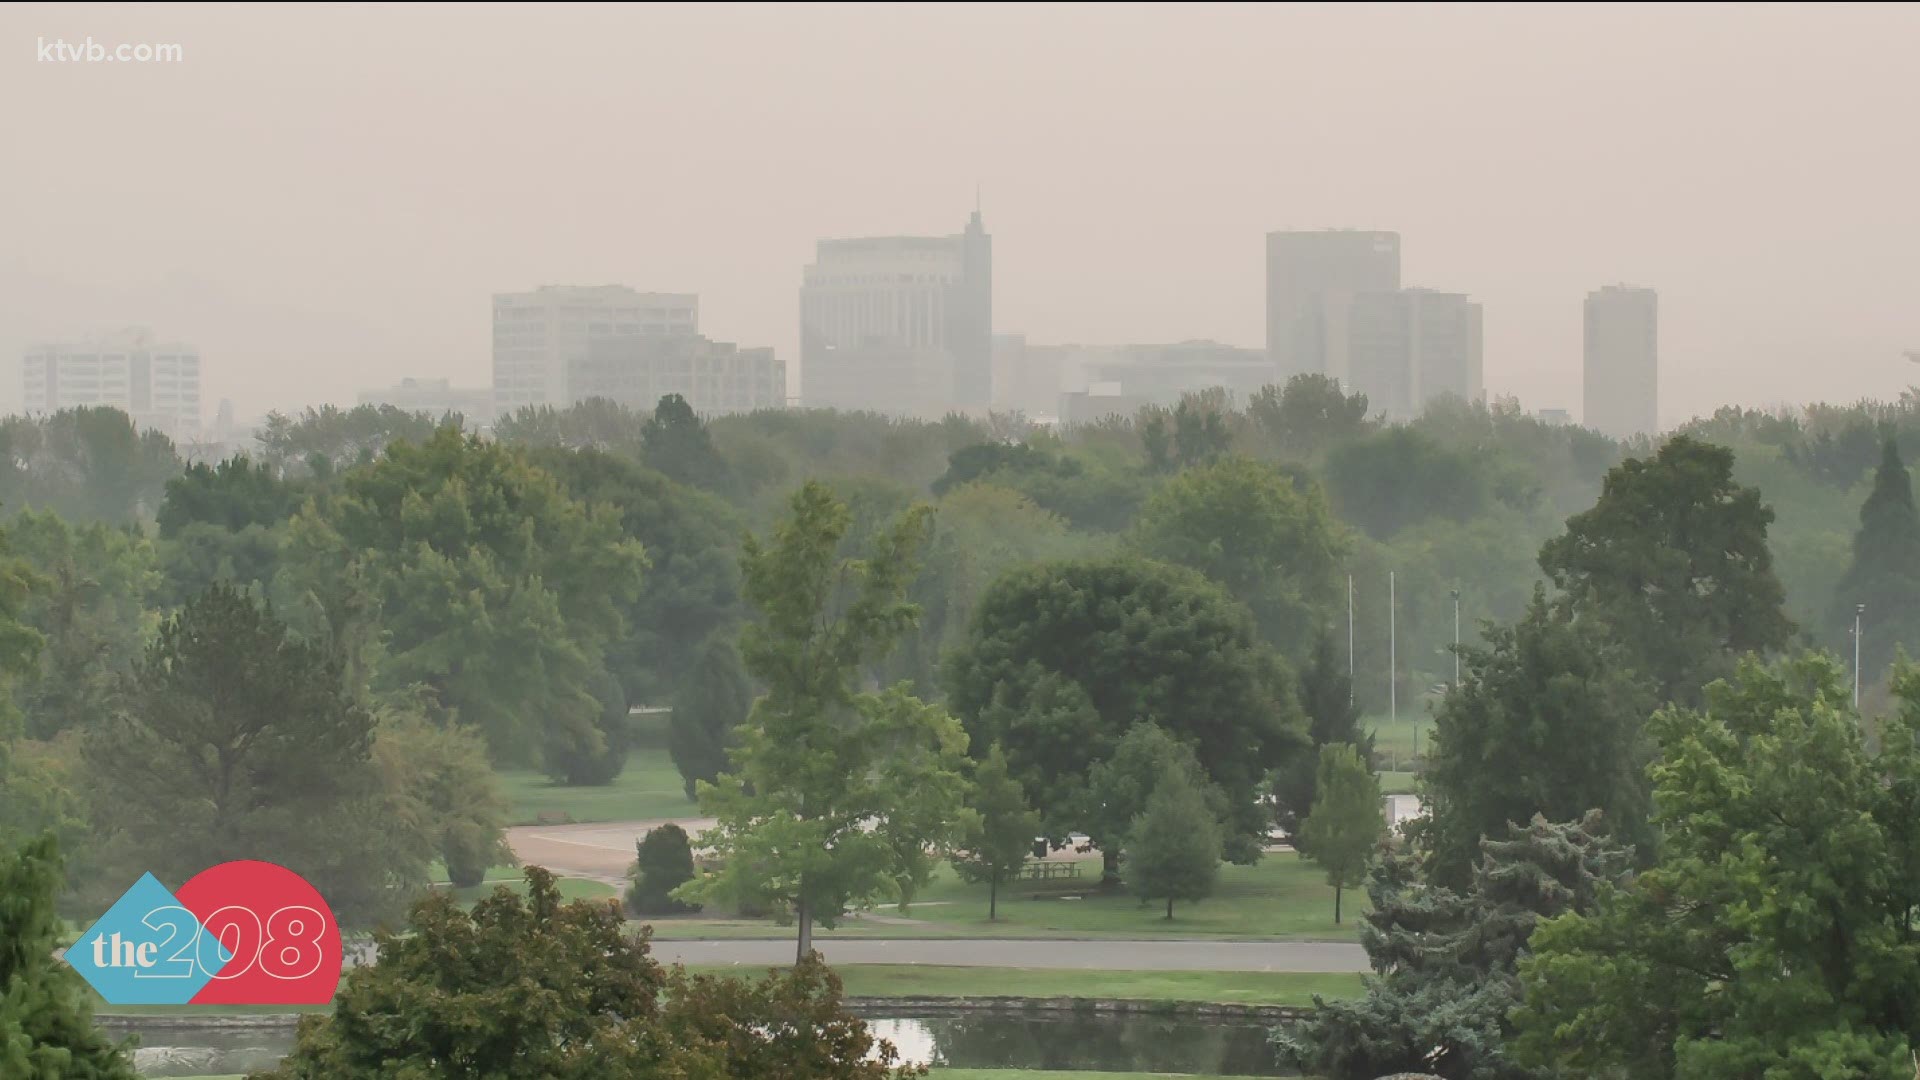 The Idaho Department of Environmental Quality says we usually have it pretty good in Idaho. Not so much right now.